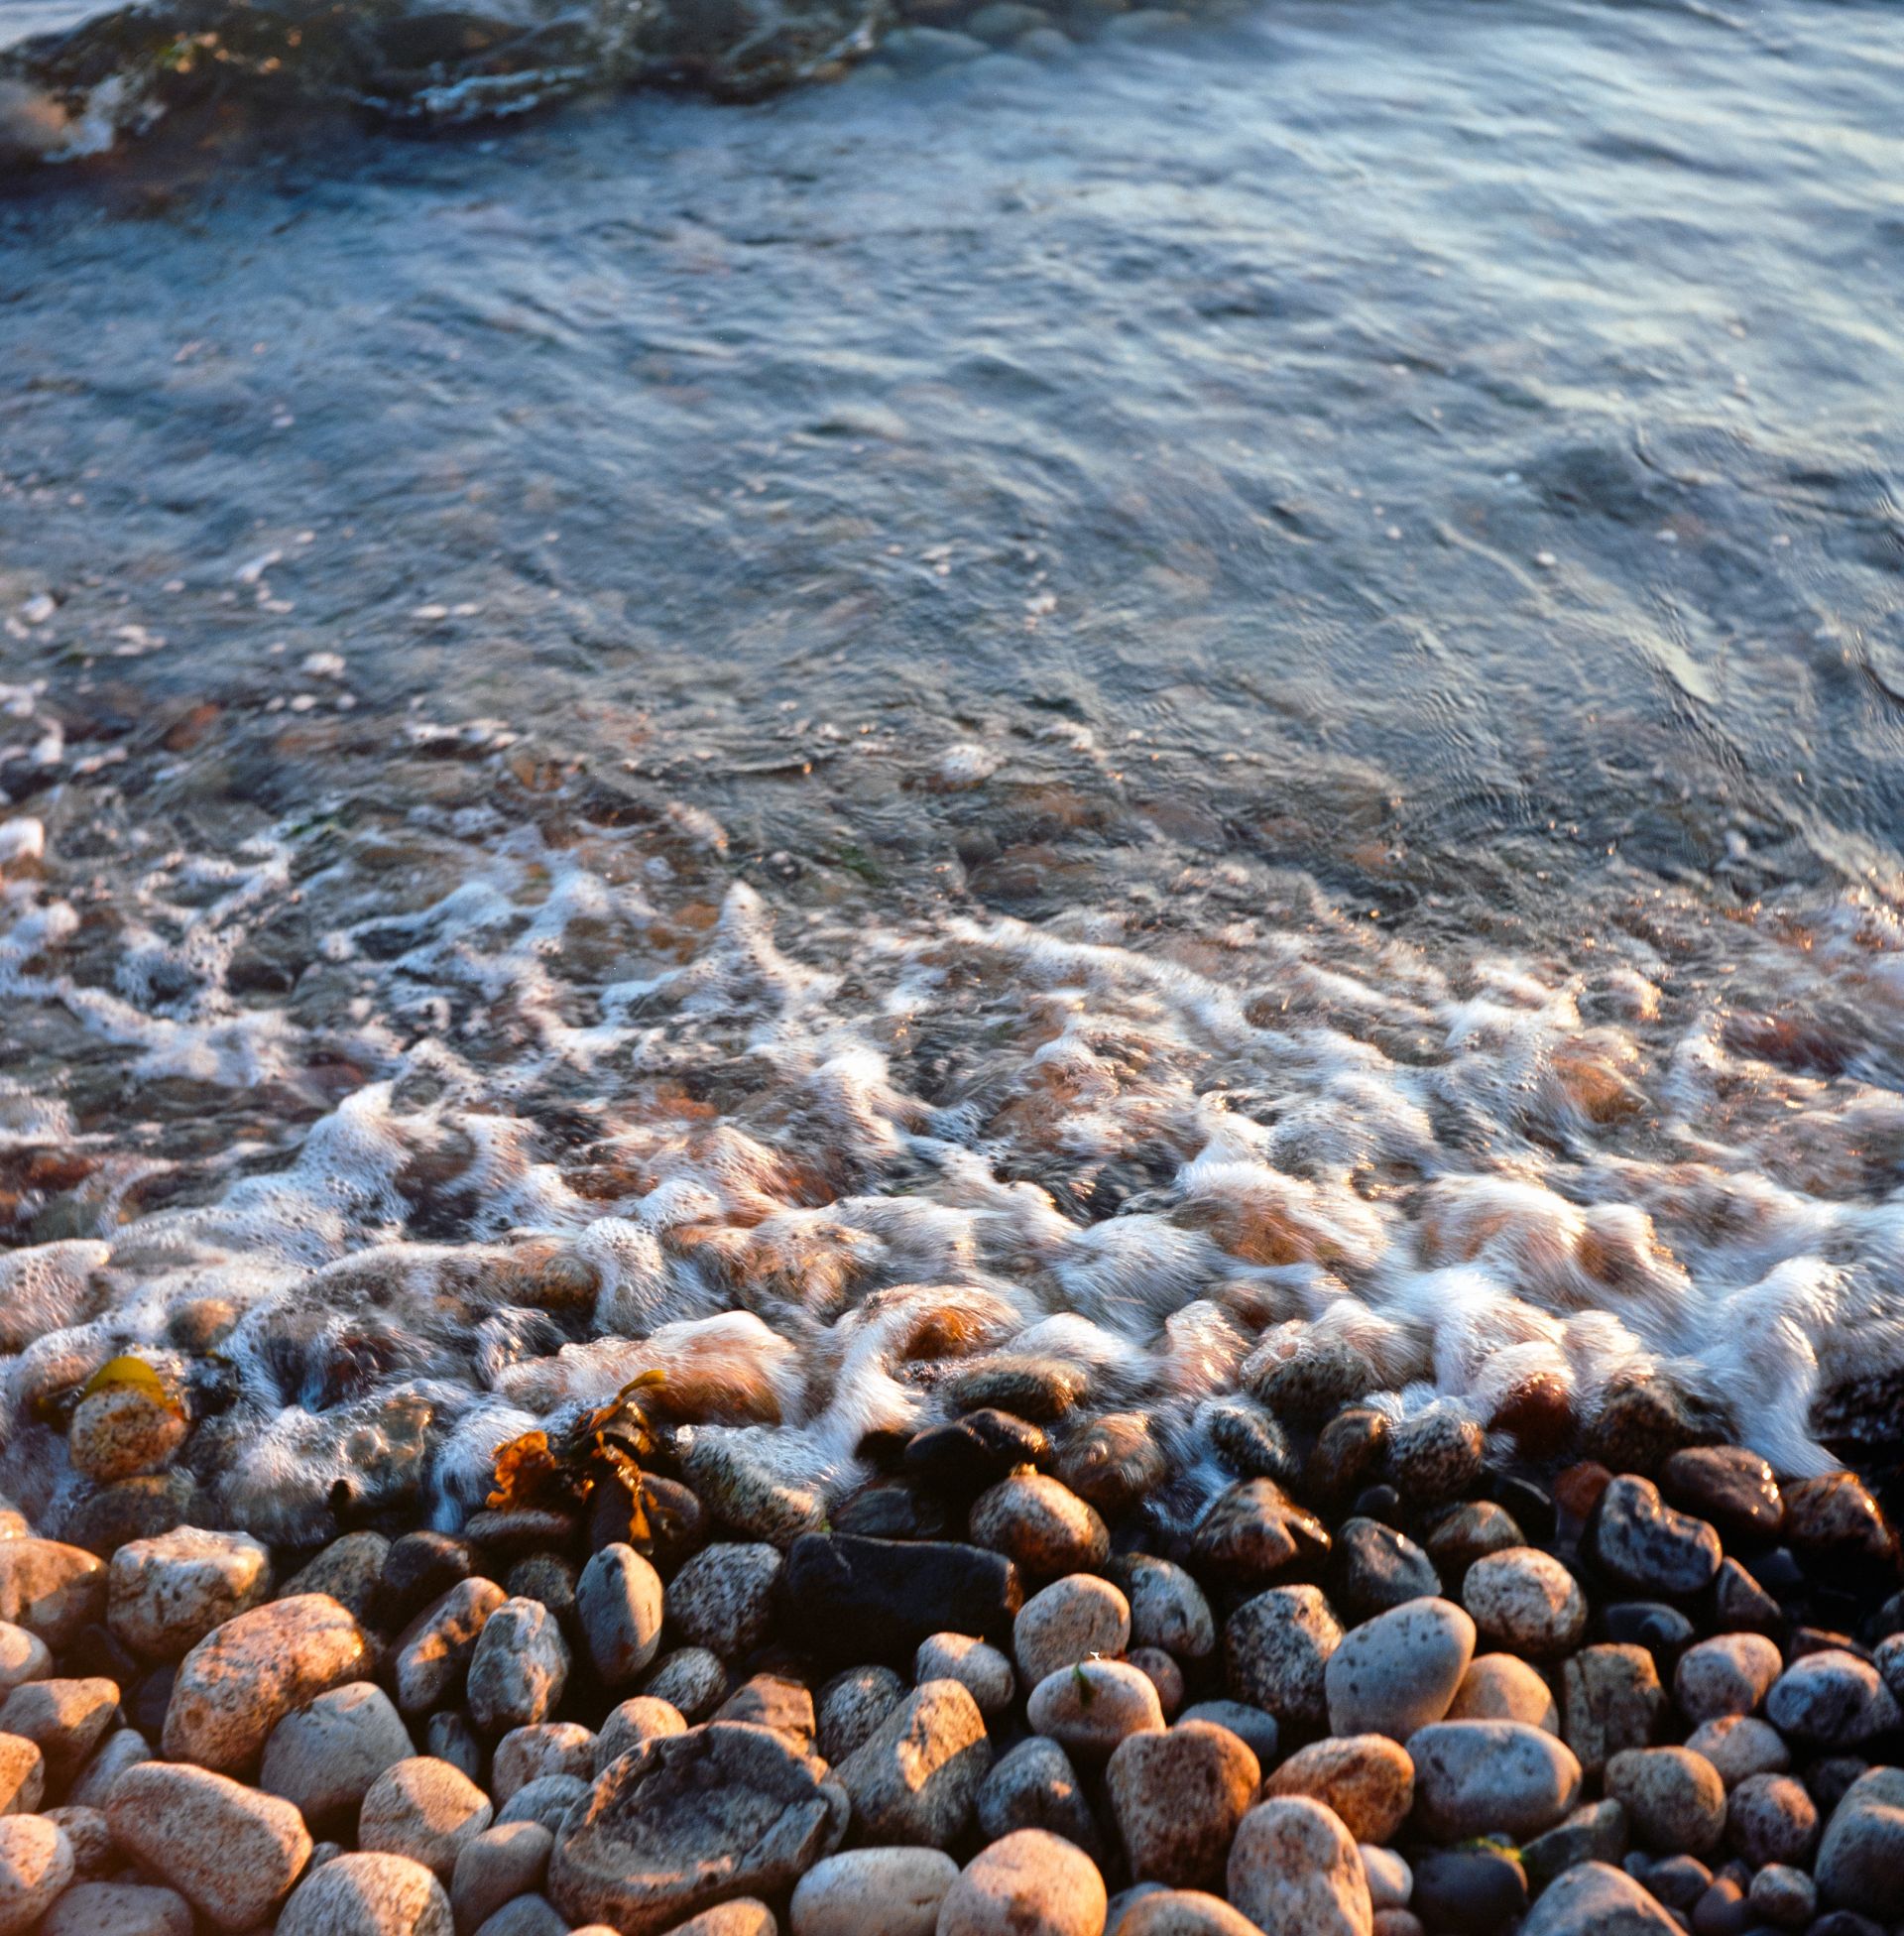 Pebbles in the surf, somewhere near Gibsons, B.C.